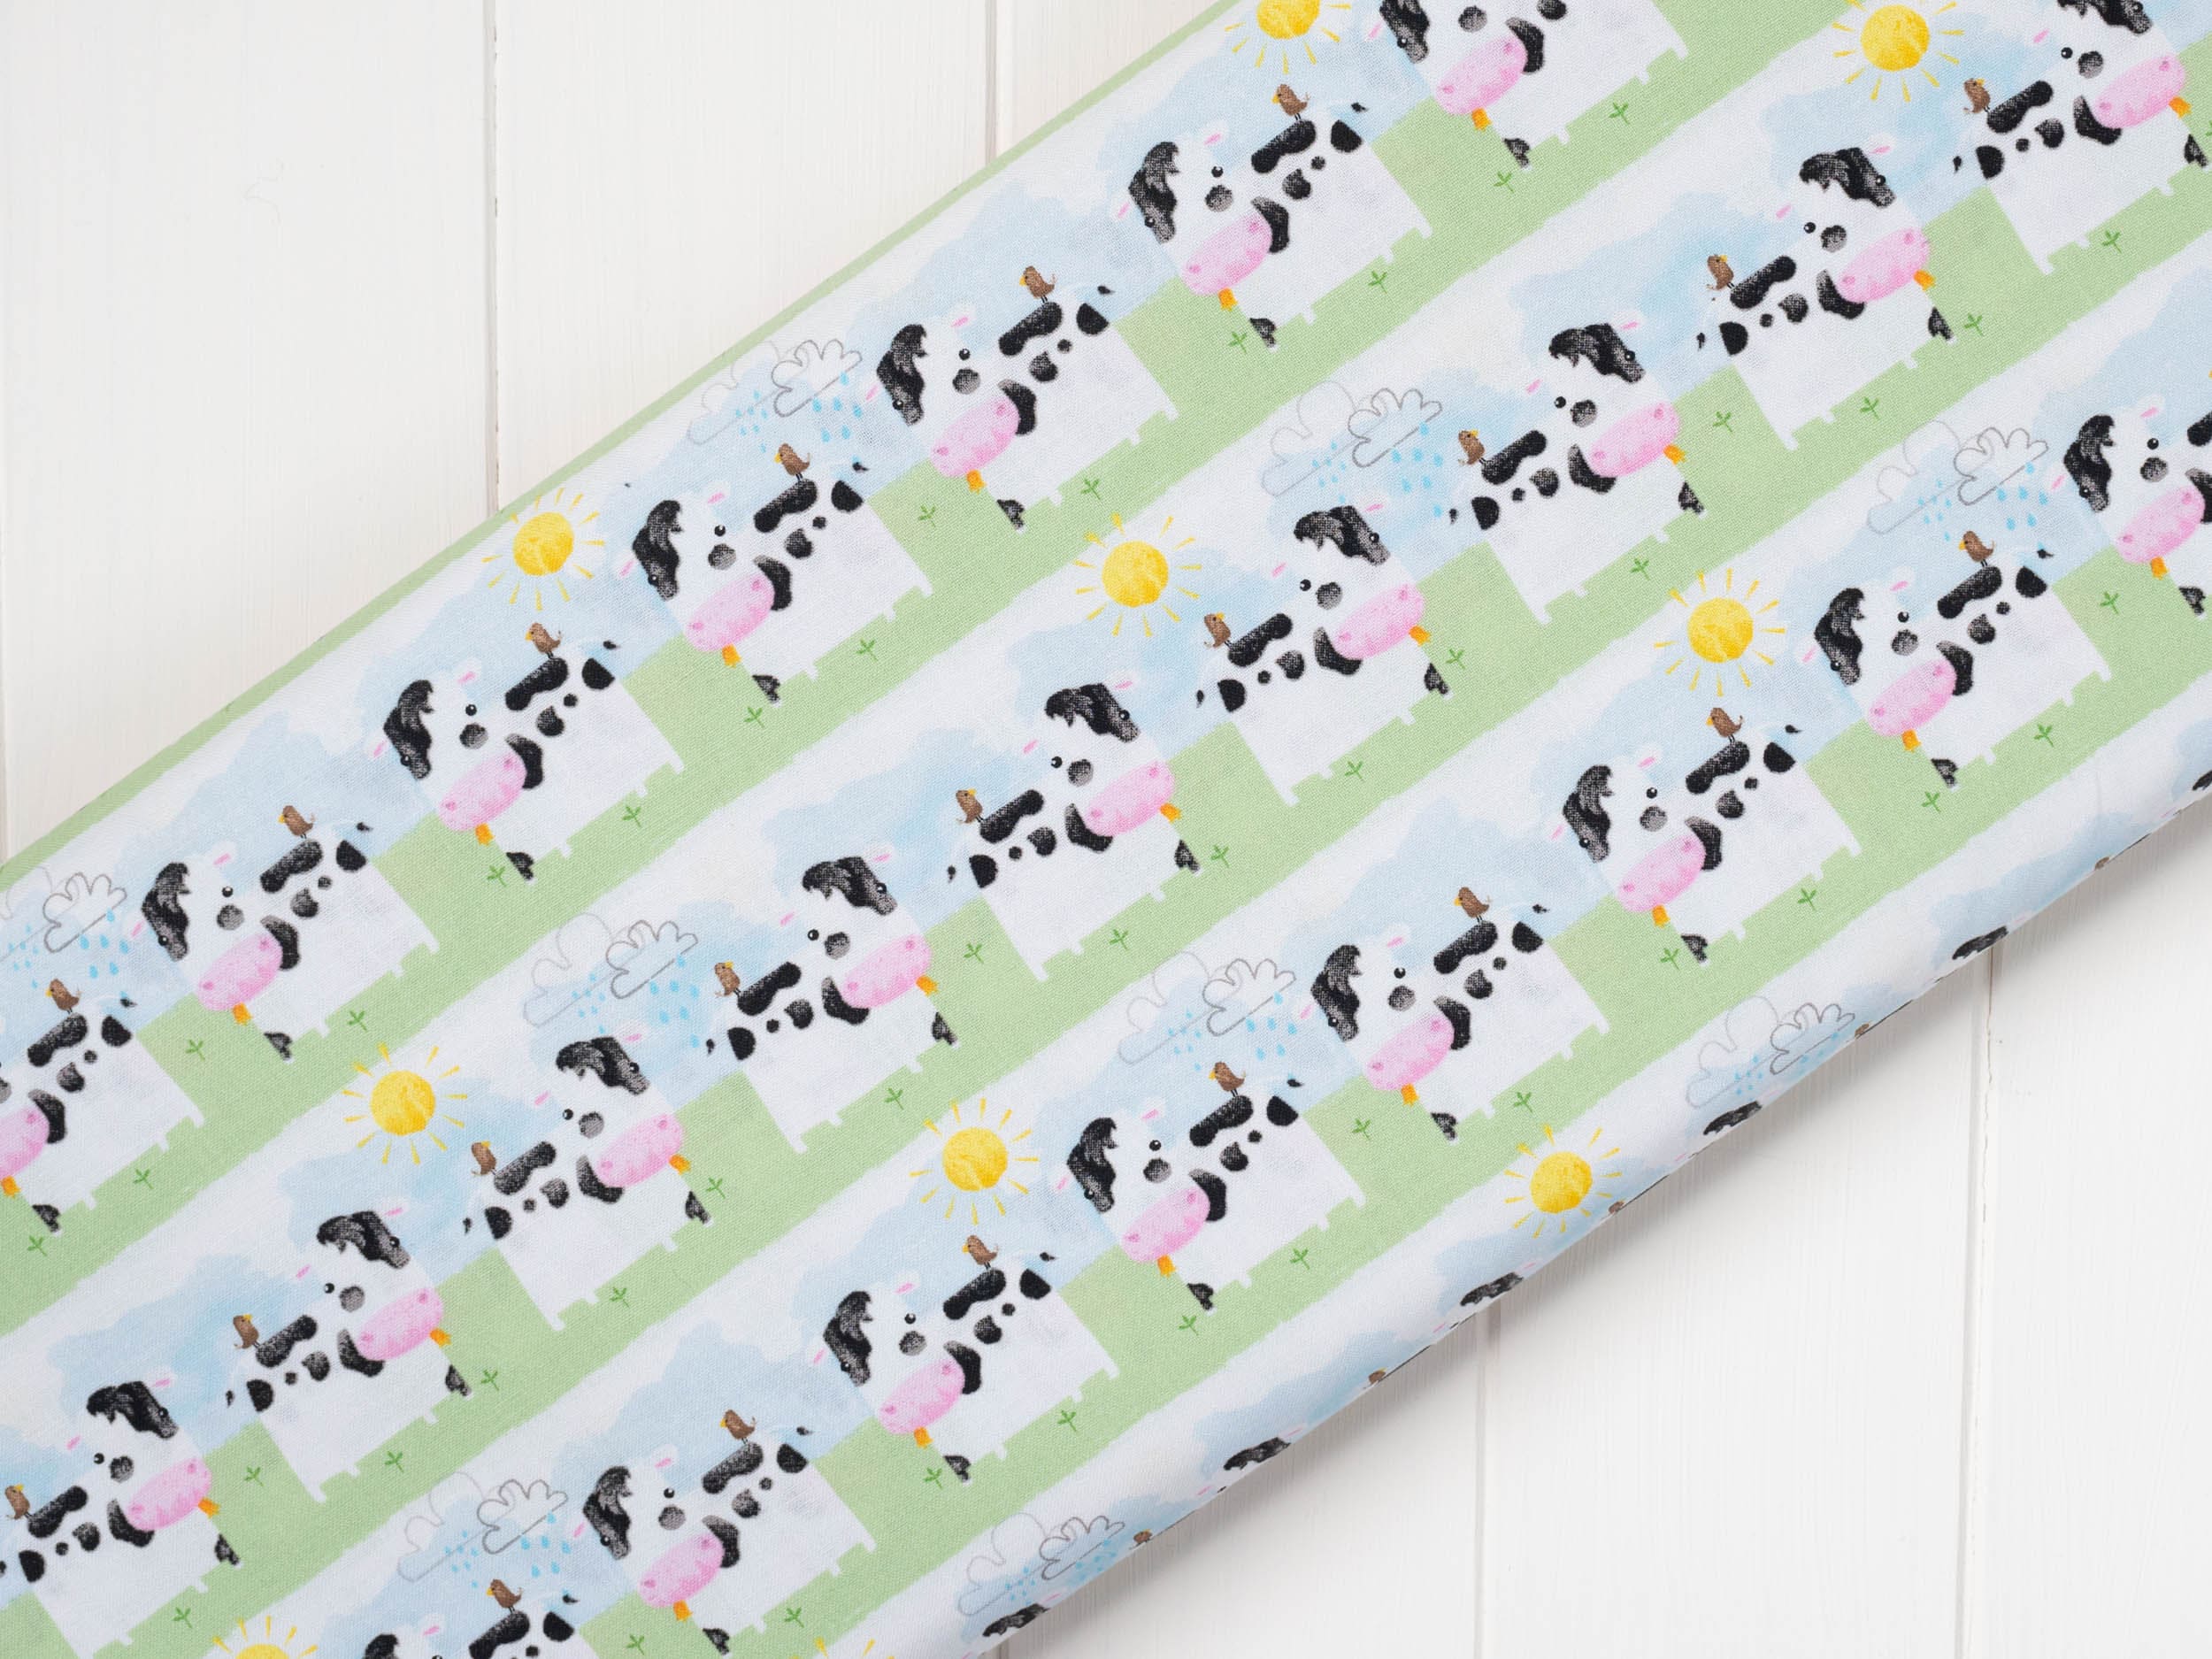 Striped fabric with cows all in a line with sun shining - Playful Farm by Fabric Editions